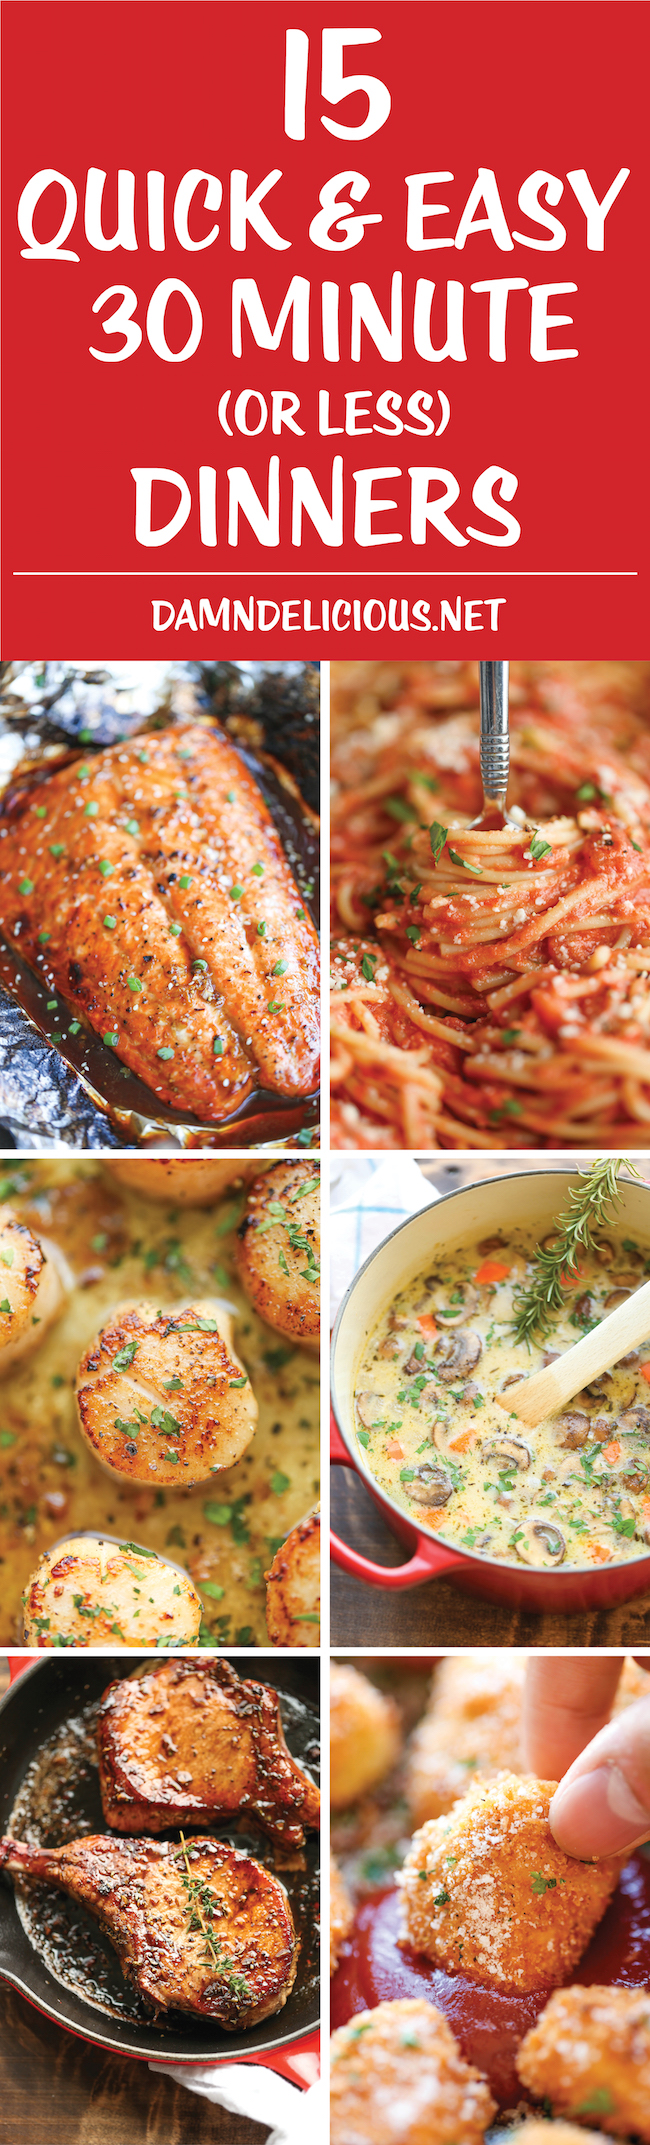 15 Quick and Easy 30 Minute Dinners - Dinner can be on the table in 30 min from start to finish with these fast, quick, easy, and delicious recipes!